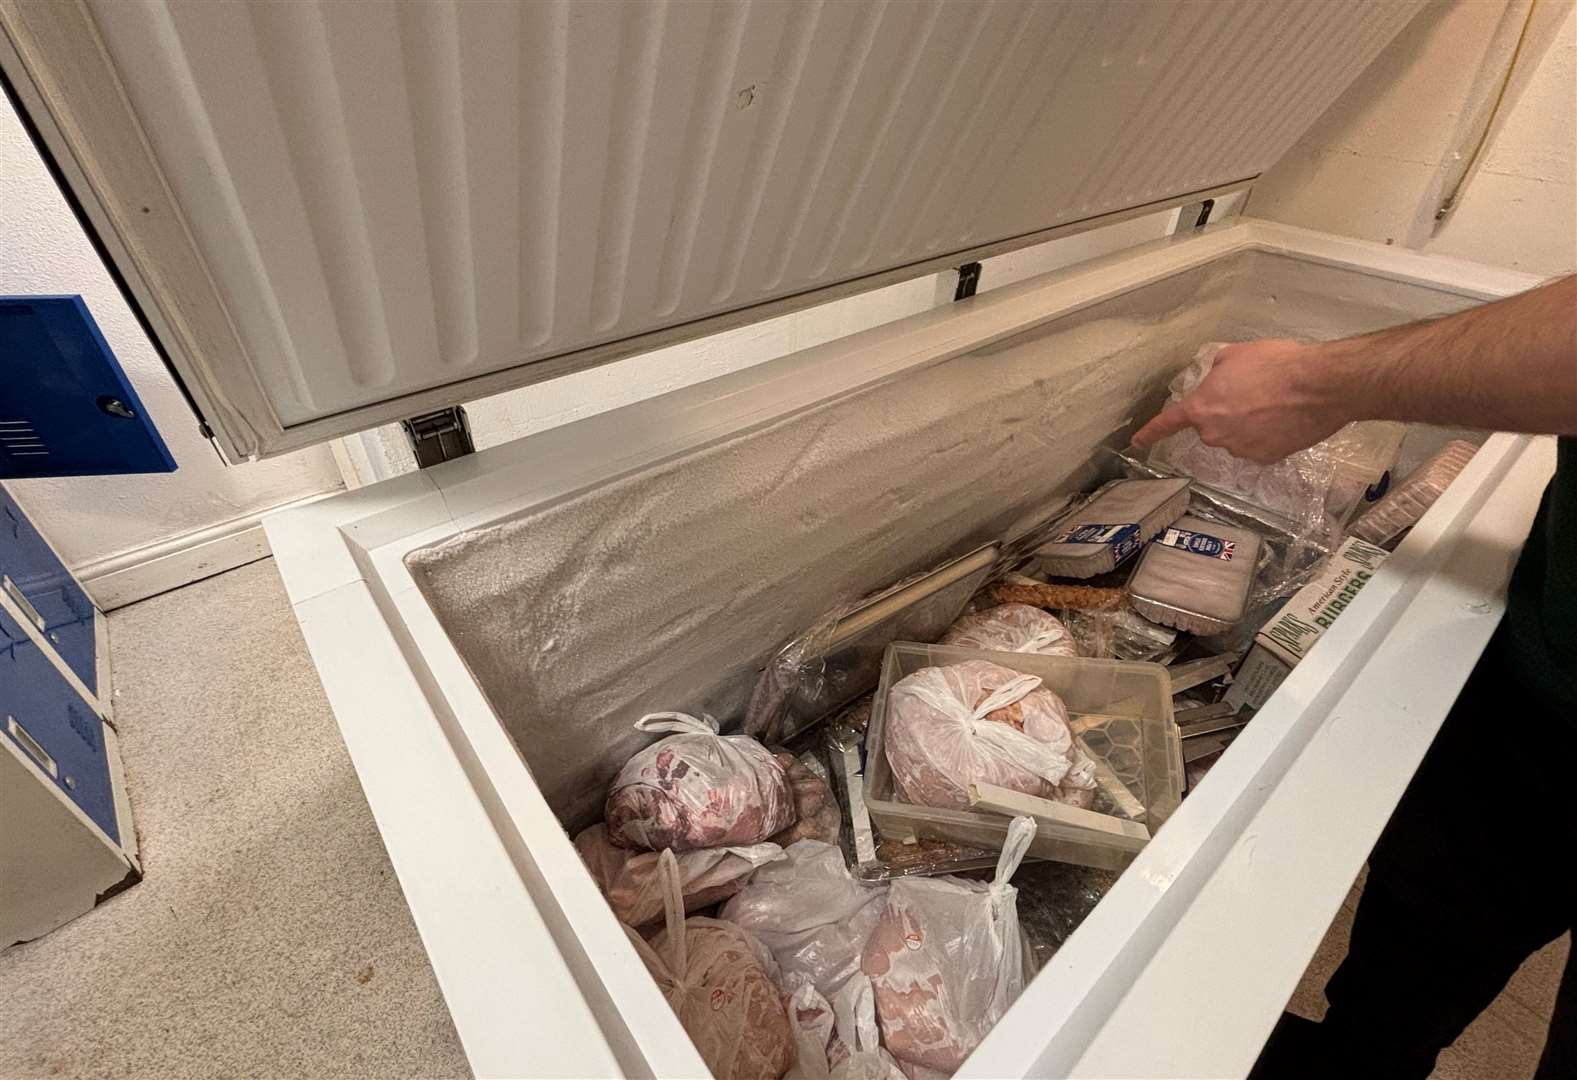 A new freezer has been installed after food hygiene inspectors highlighted the previous one was laced with mould